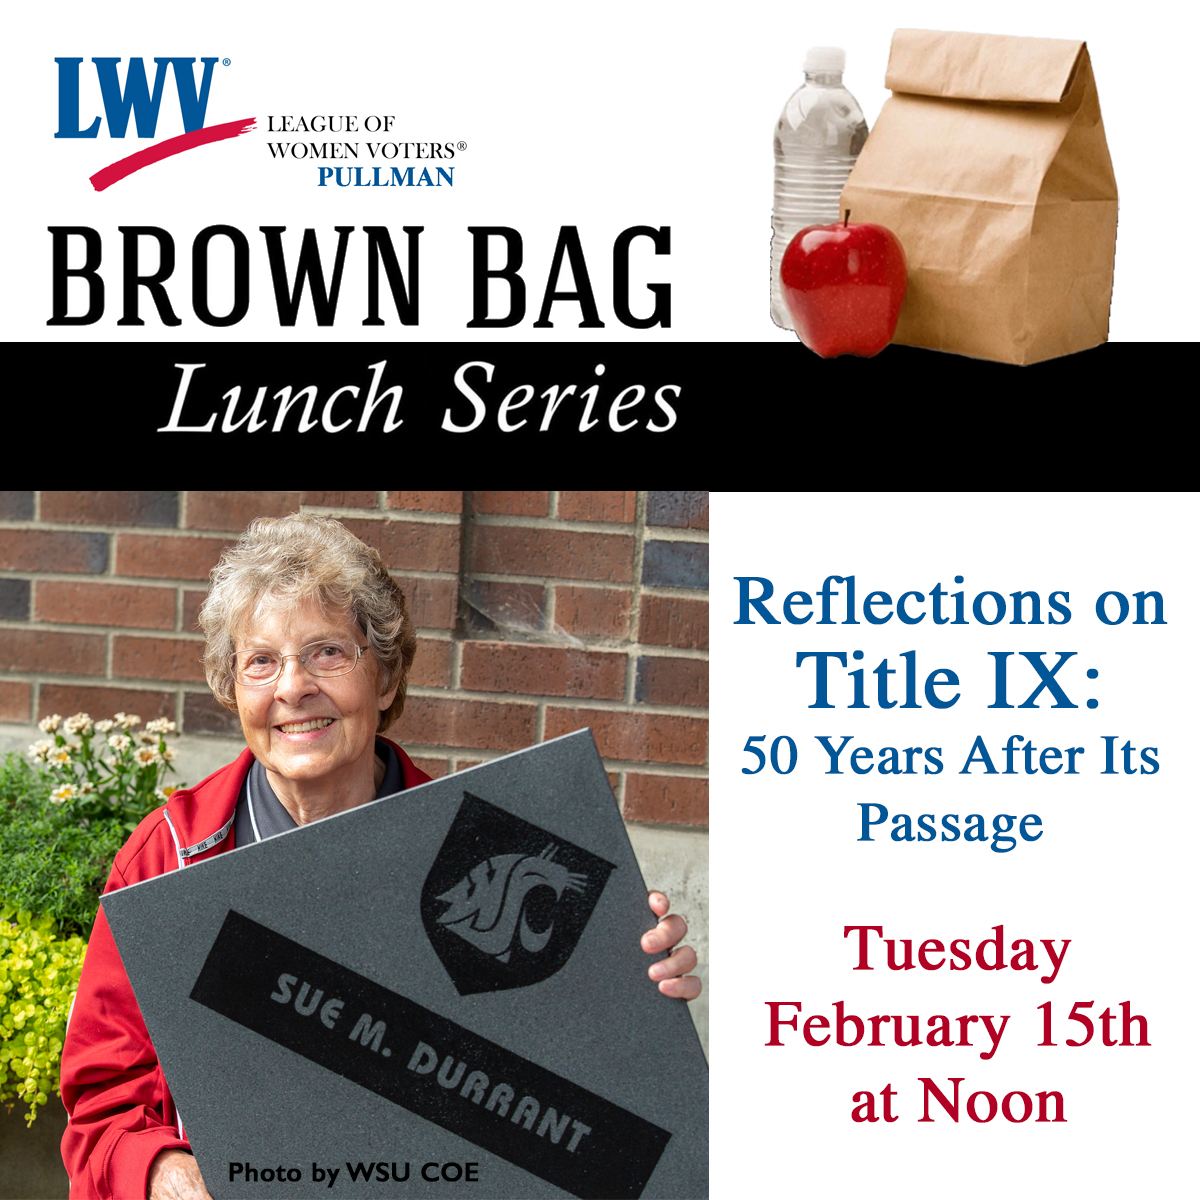 Picture of Sue Durrant with a plaque on the city's Walk of Fame and the Brown Bag Meeting information titled Reflections on Title IX: 50 years after its passage, February 15 at noon.